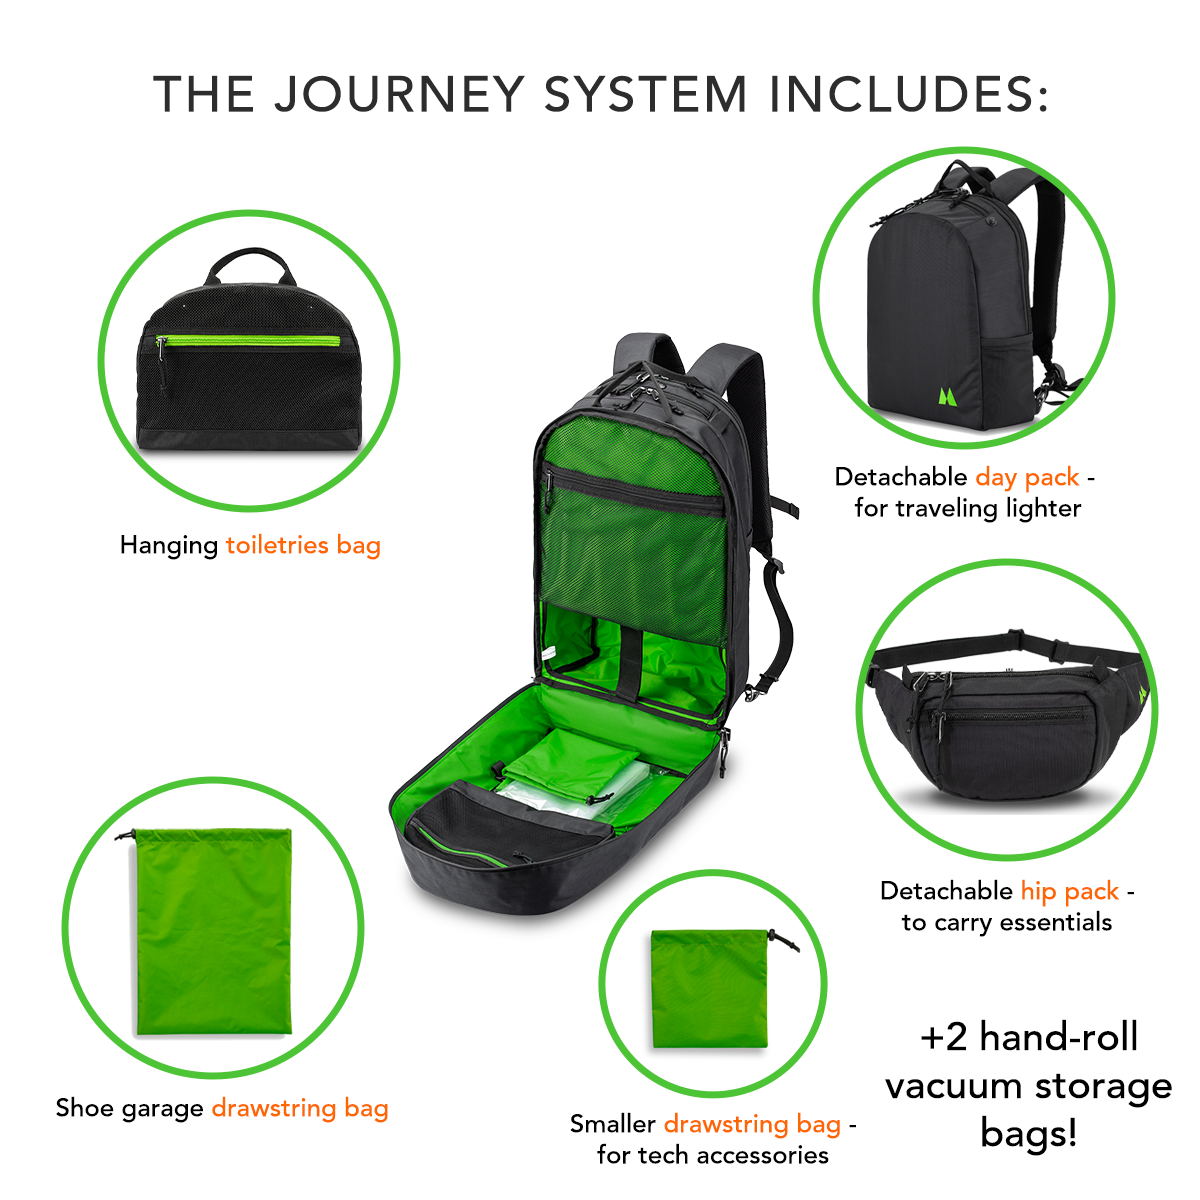 The Journey - Complete 5-in-1 Modular Travel Bag System